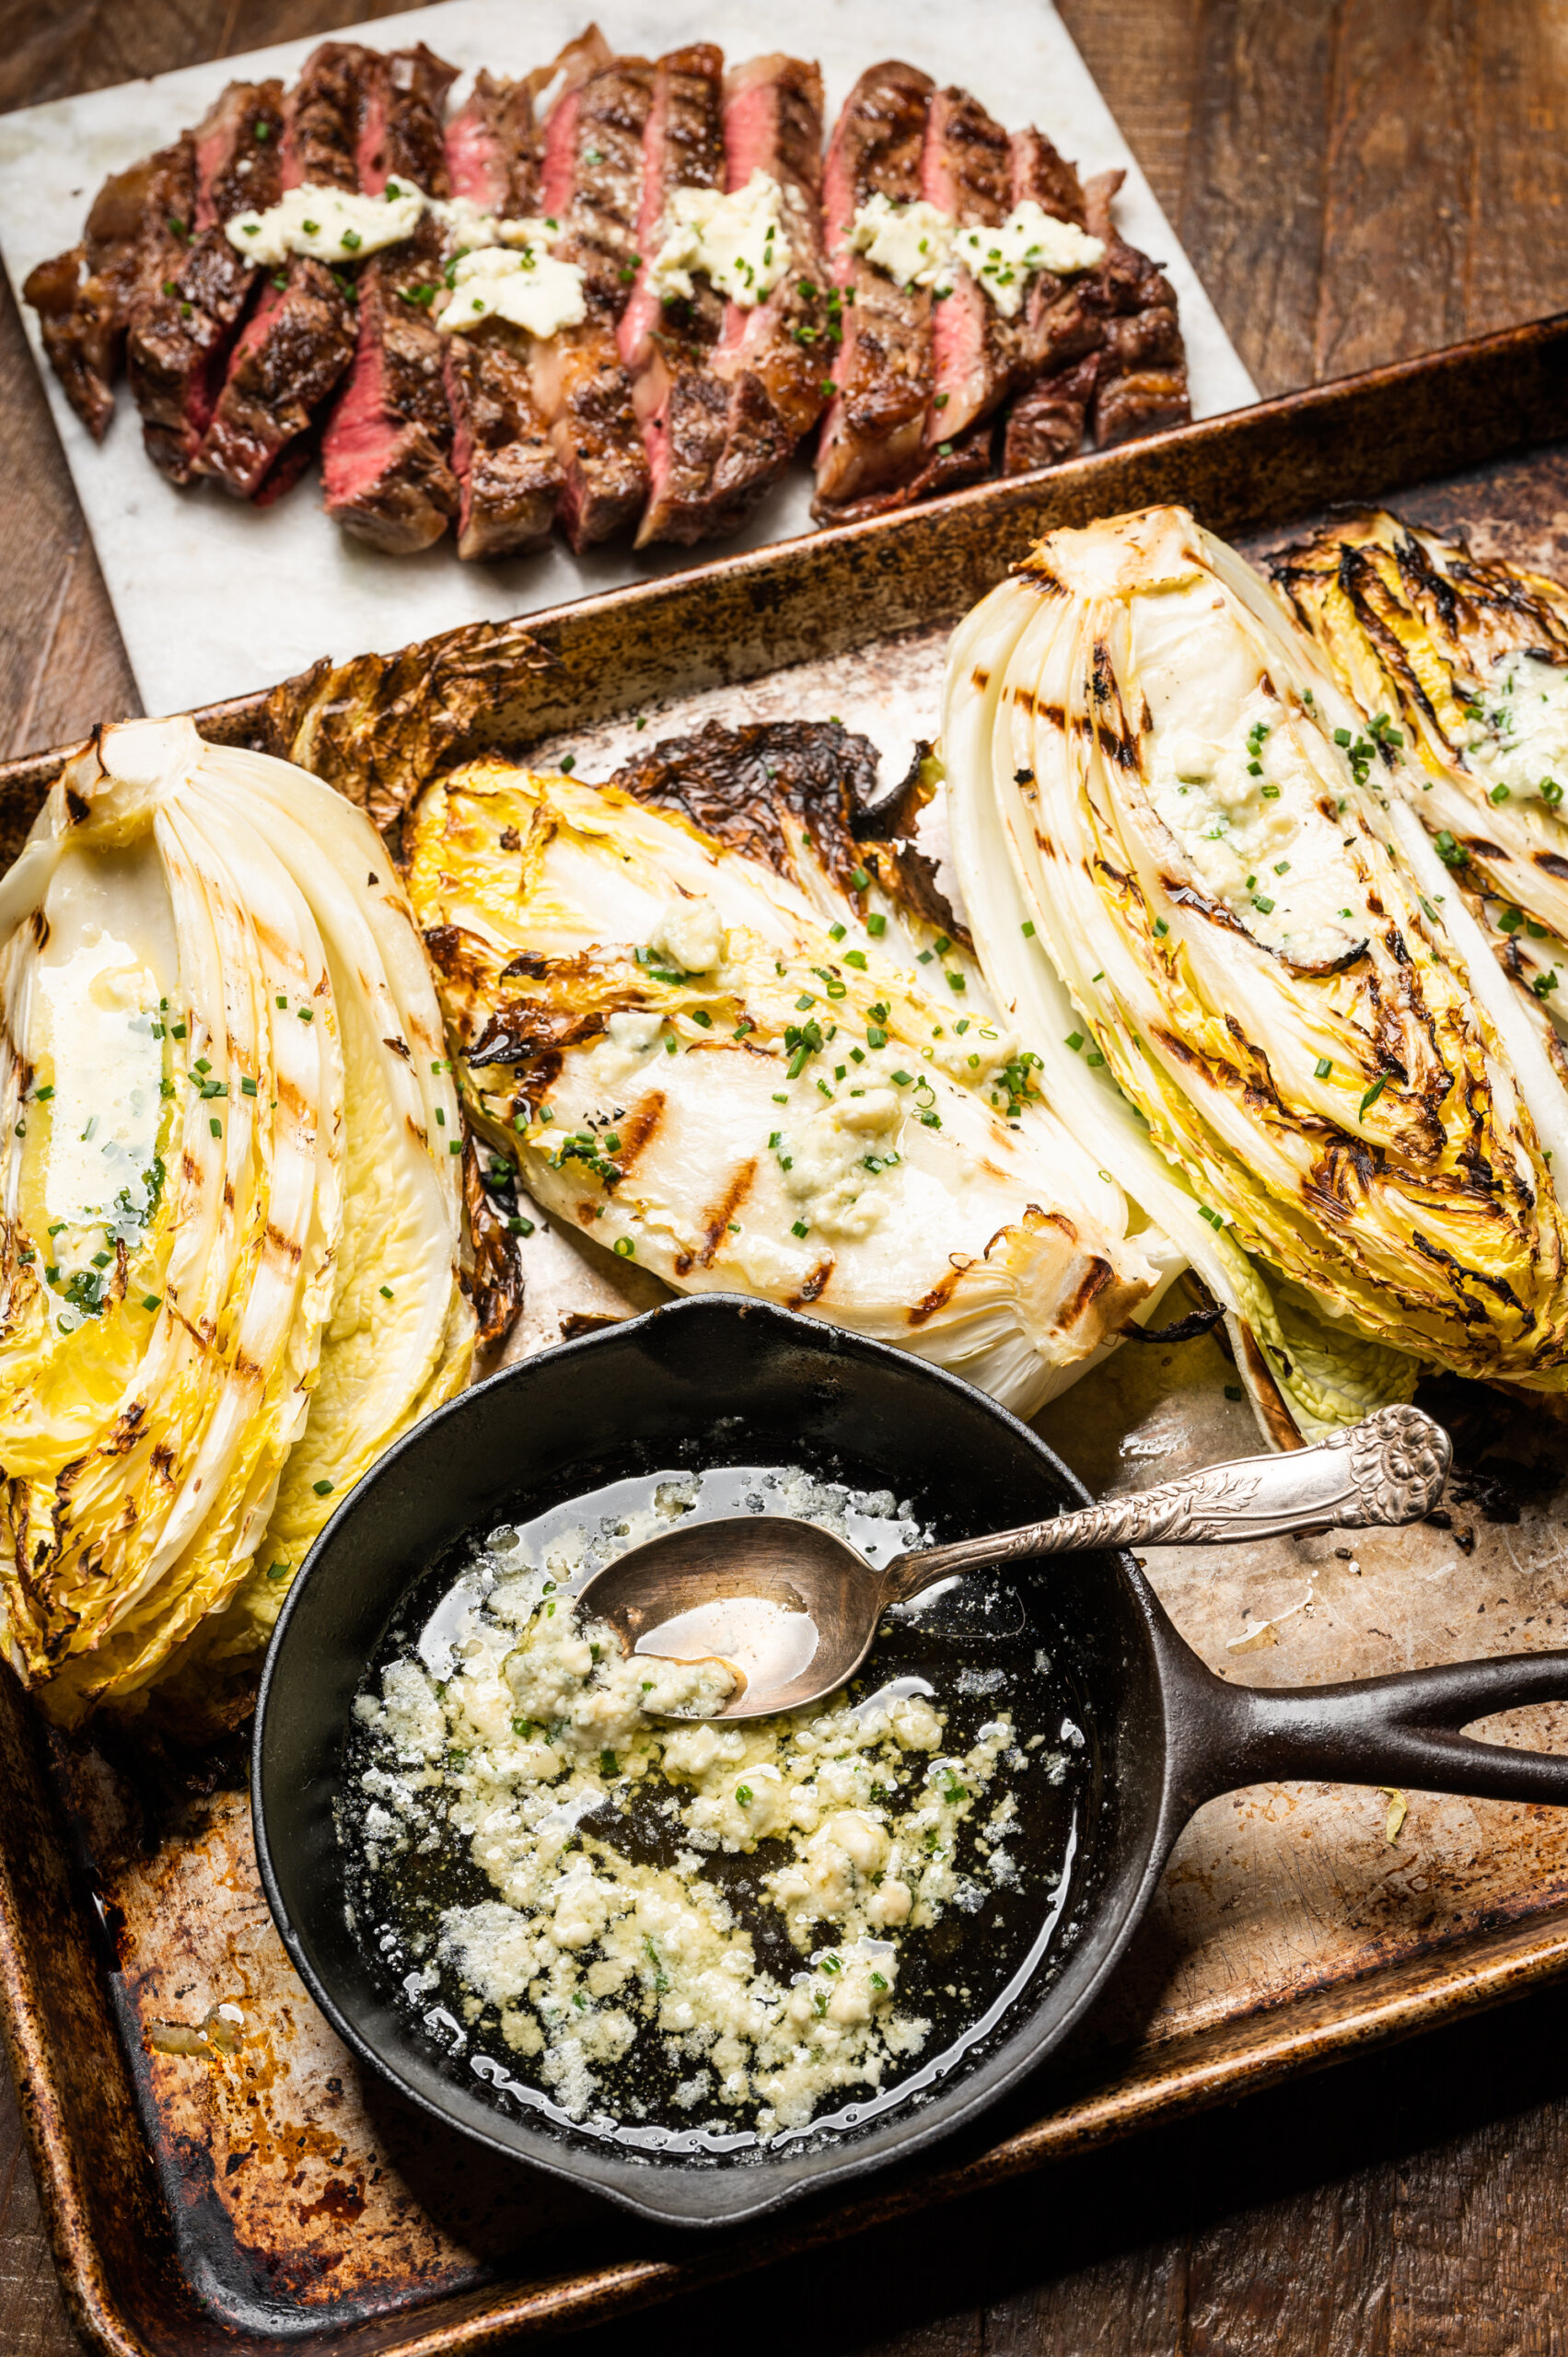 A spread of grilled napa cabbage and steak with bleu cheese butter and chives